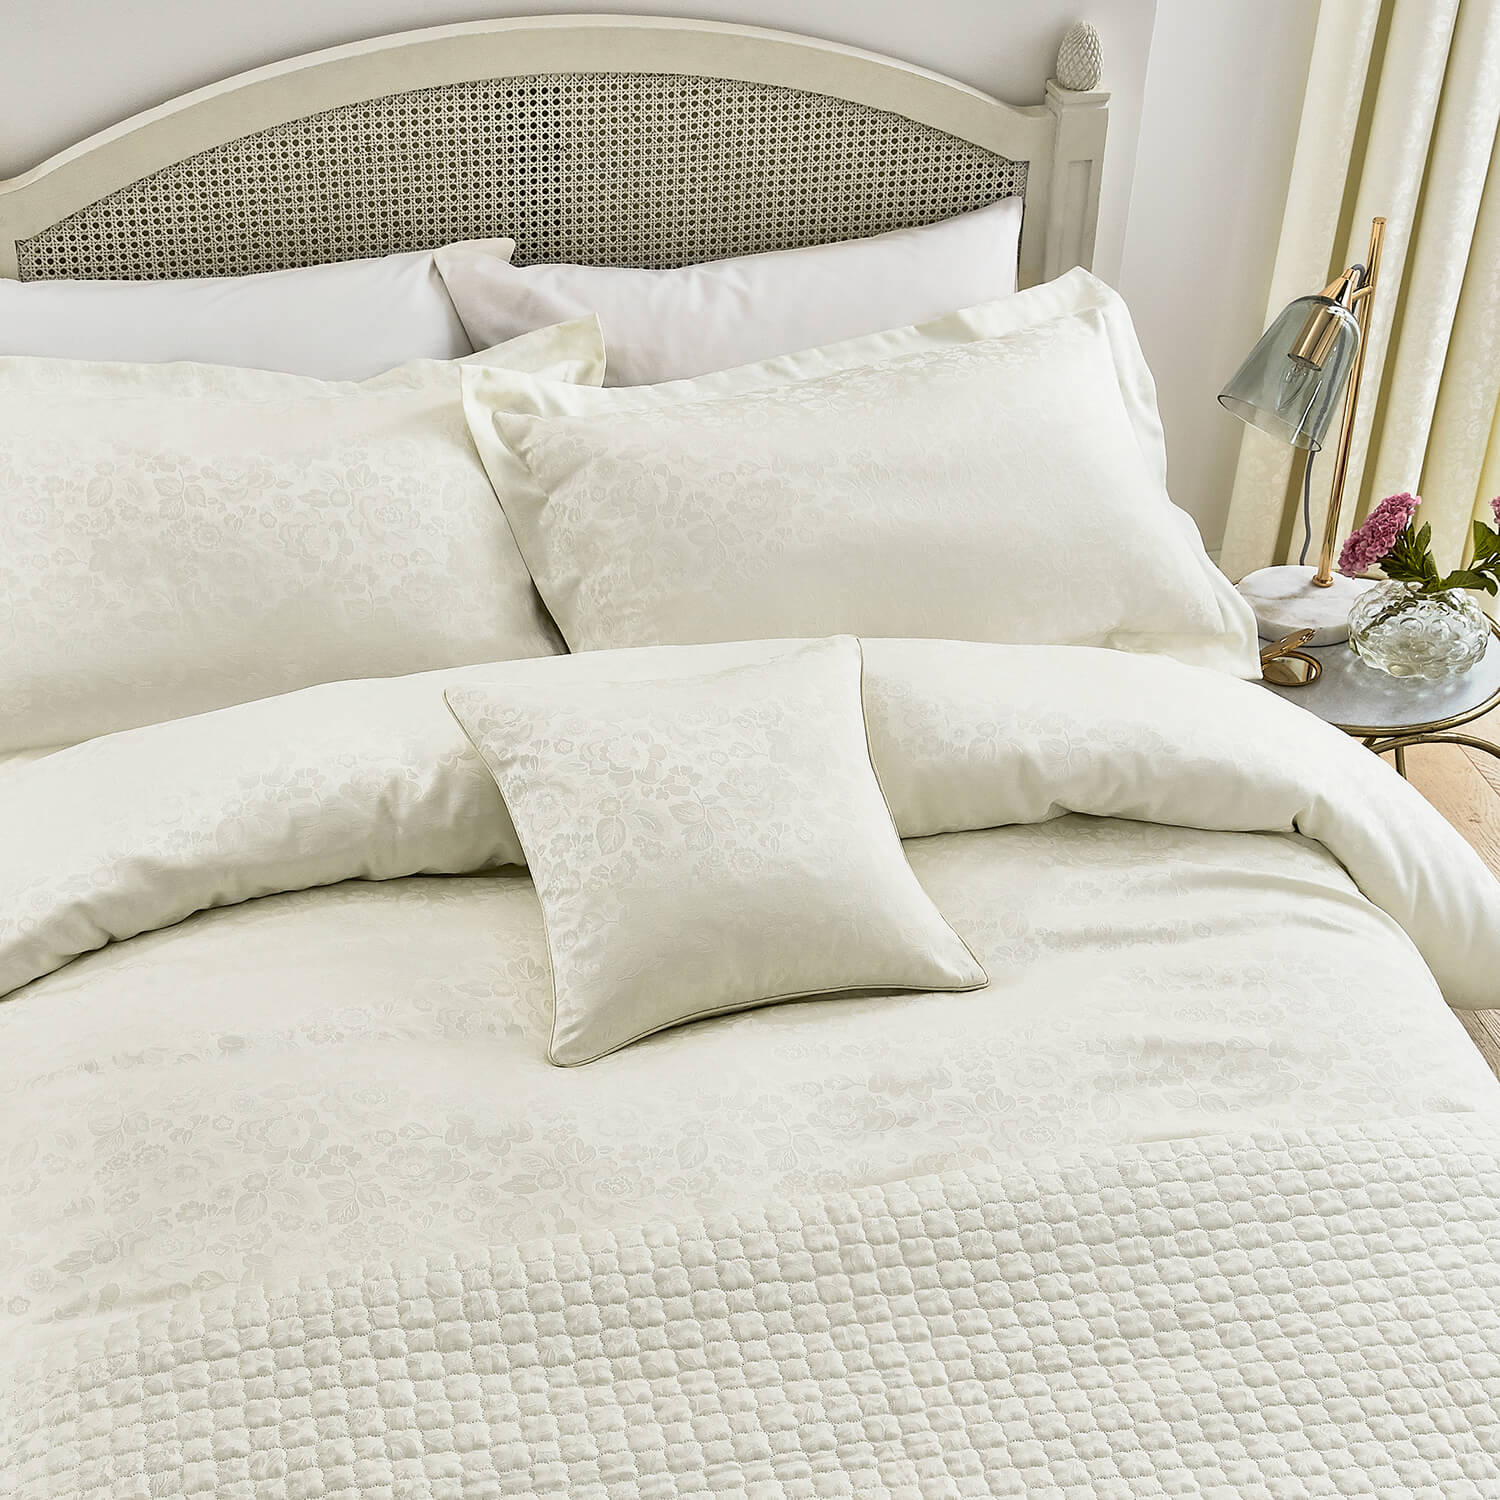  Helena Springfield Cassie Duvet Cover - Ivory 1 Shaws Department Stores